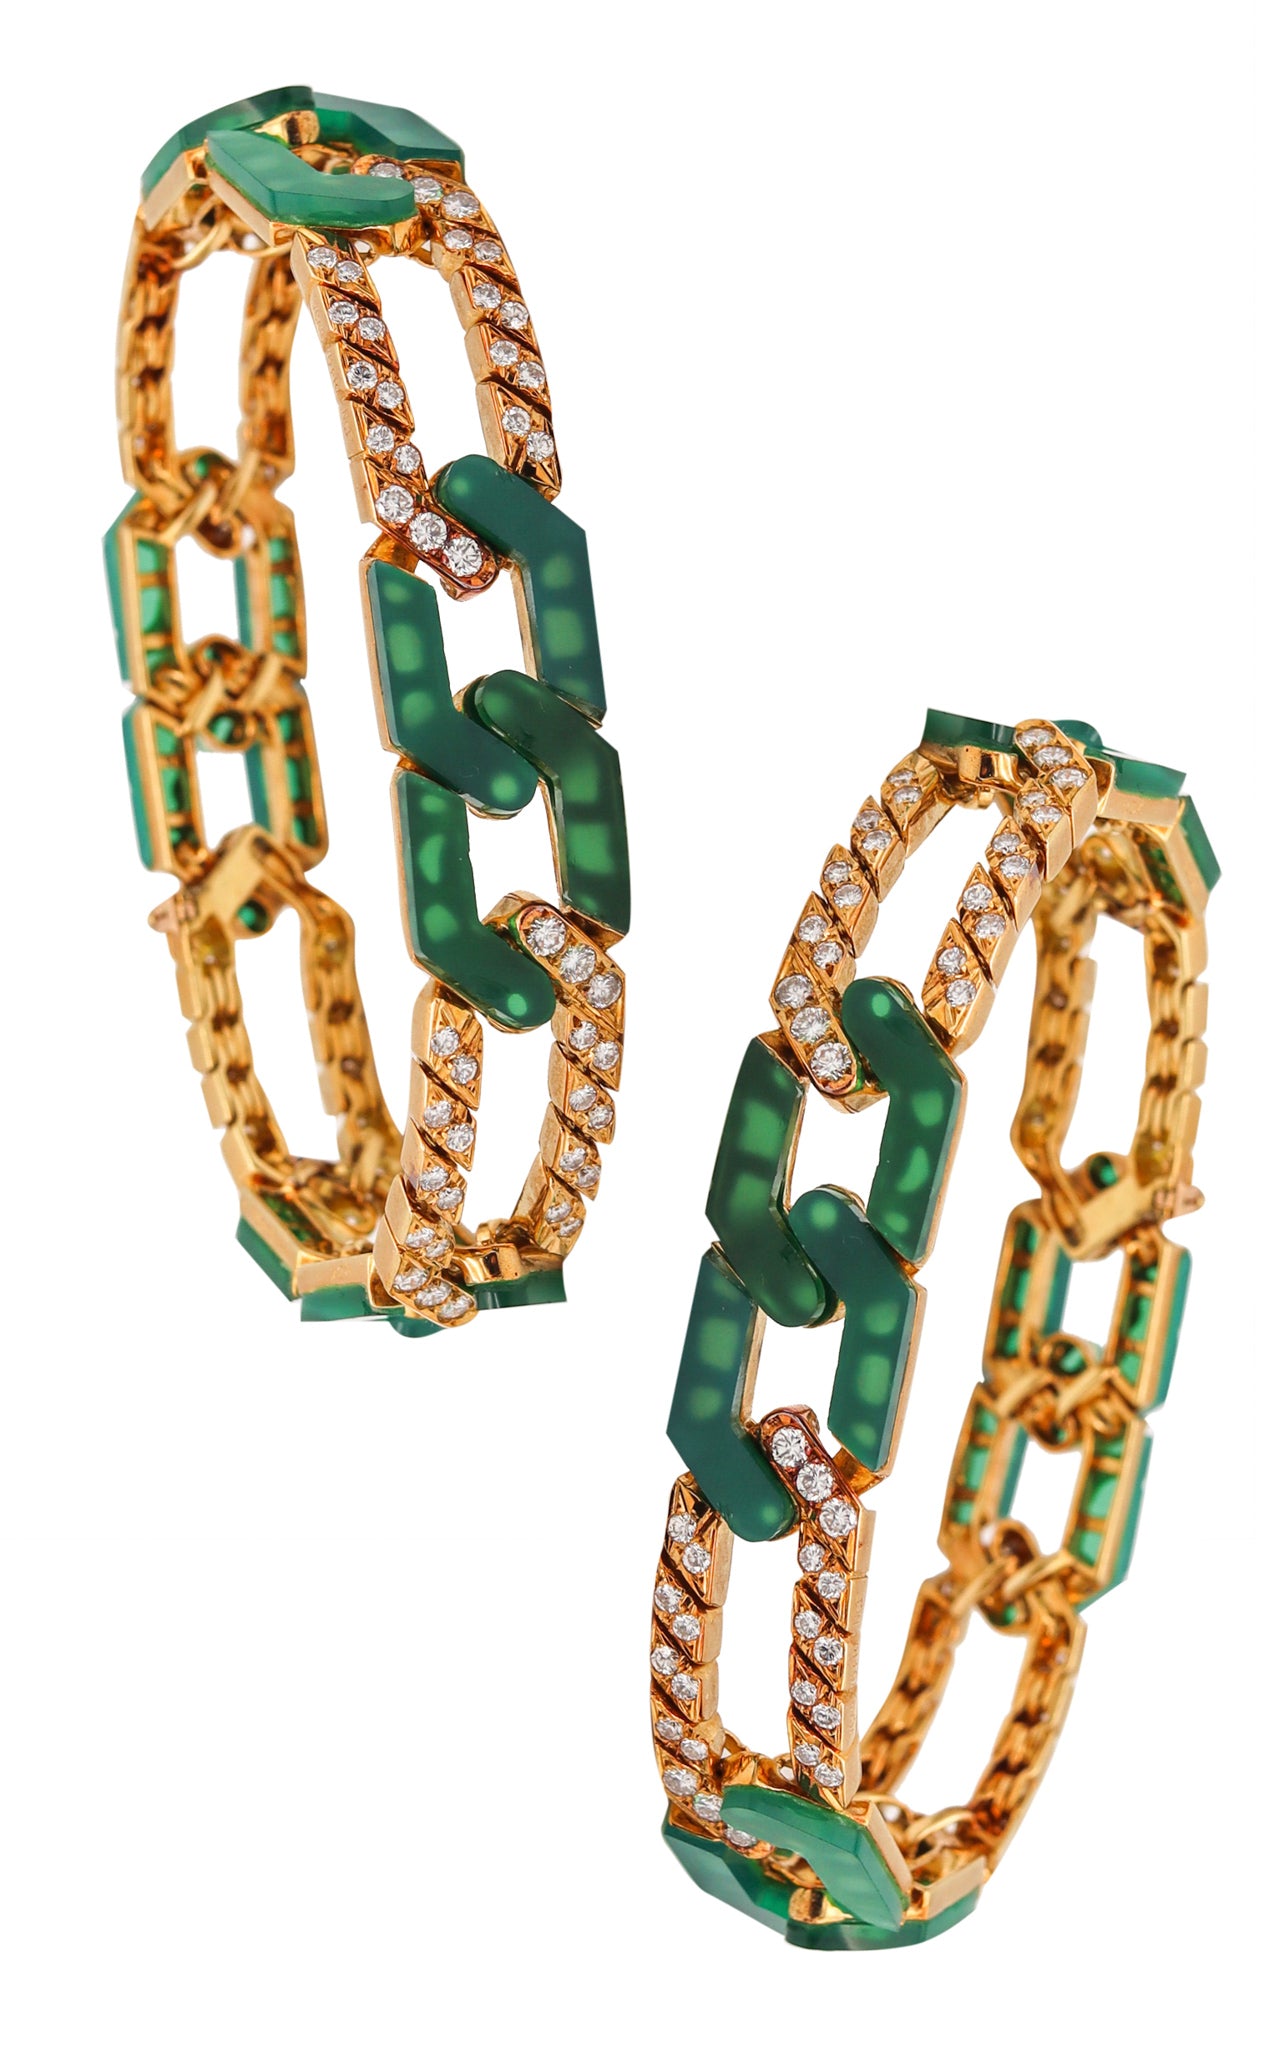 Van Cleef And Arpels 1976 Convertible Bracelets In 18Kt Gold With 6.24 Ctw In Diamonds And Chrysoprase